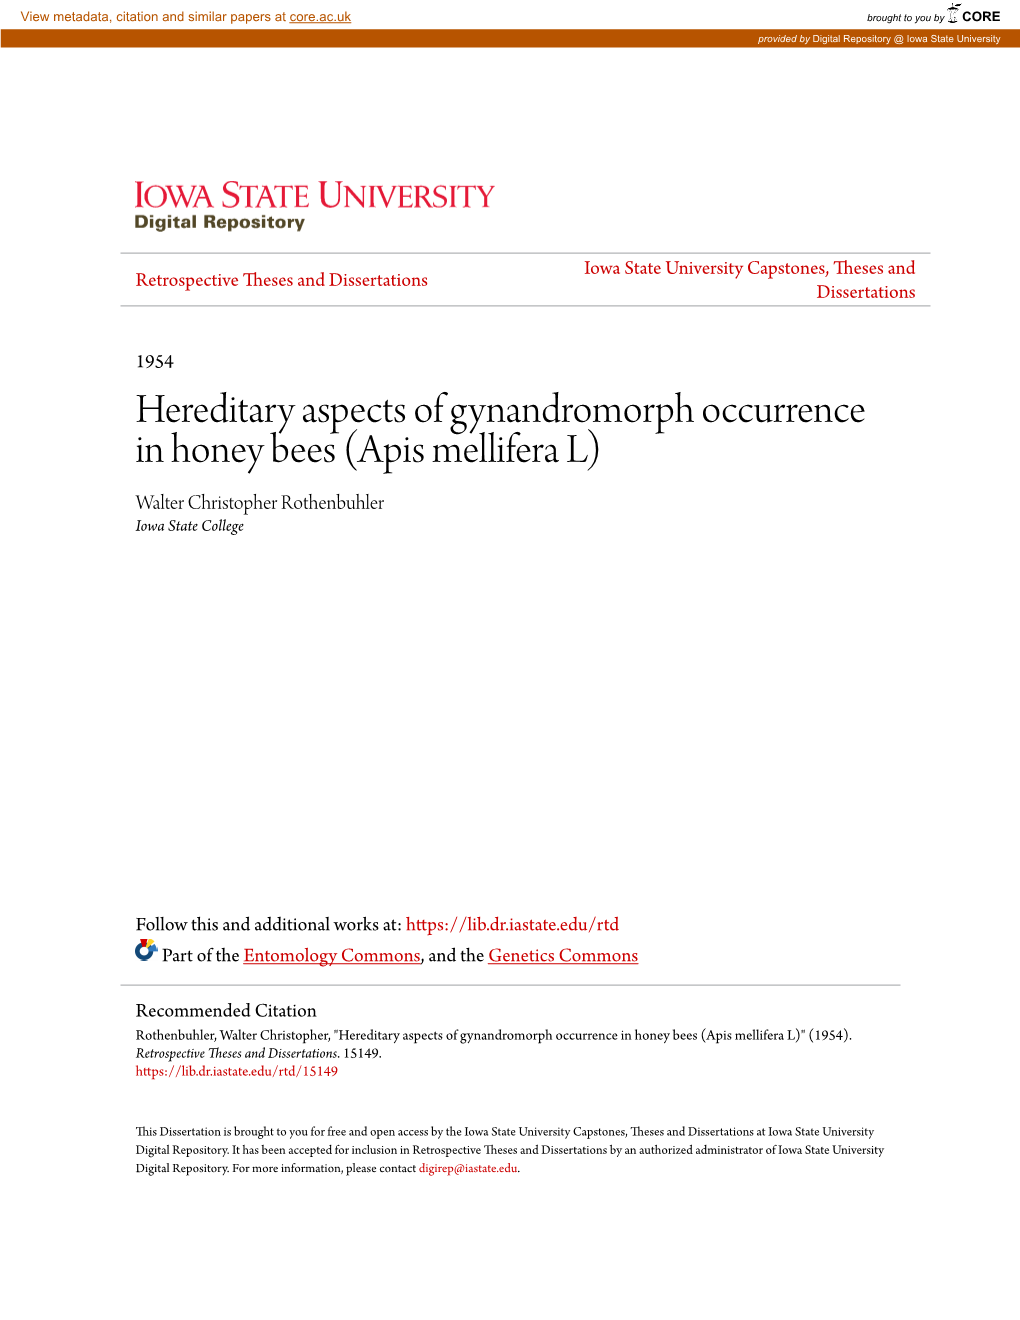 Hereditary Aspects of Gynandromorph Occurrence in Honey Bees (Apis Mellifera L) Walter Christopher Rothenbuhler Iowa State College